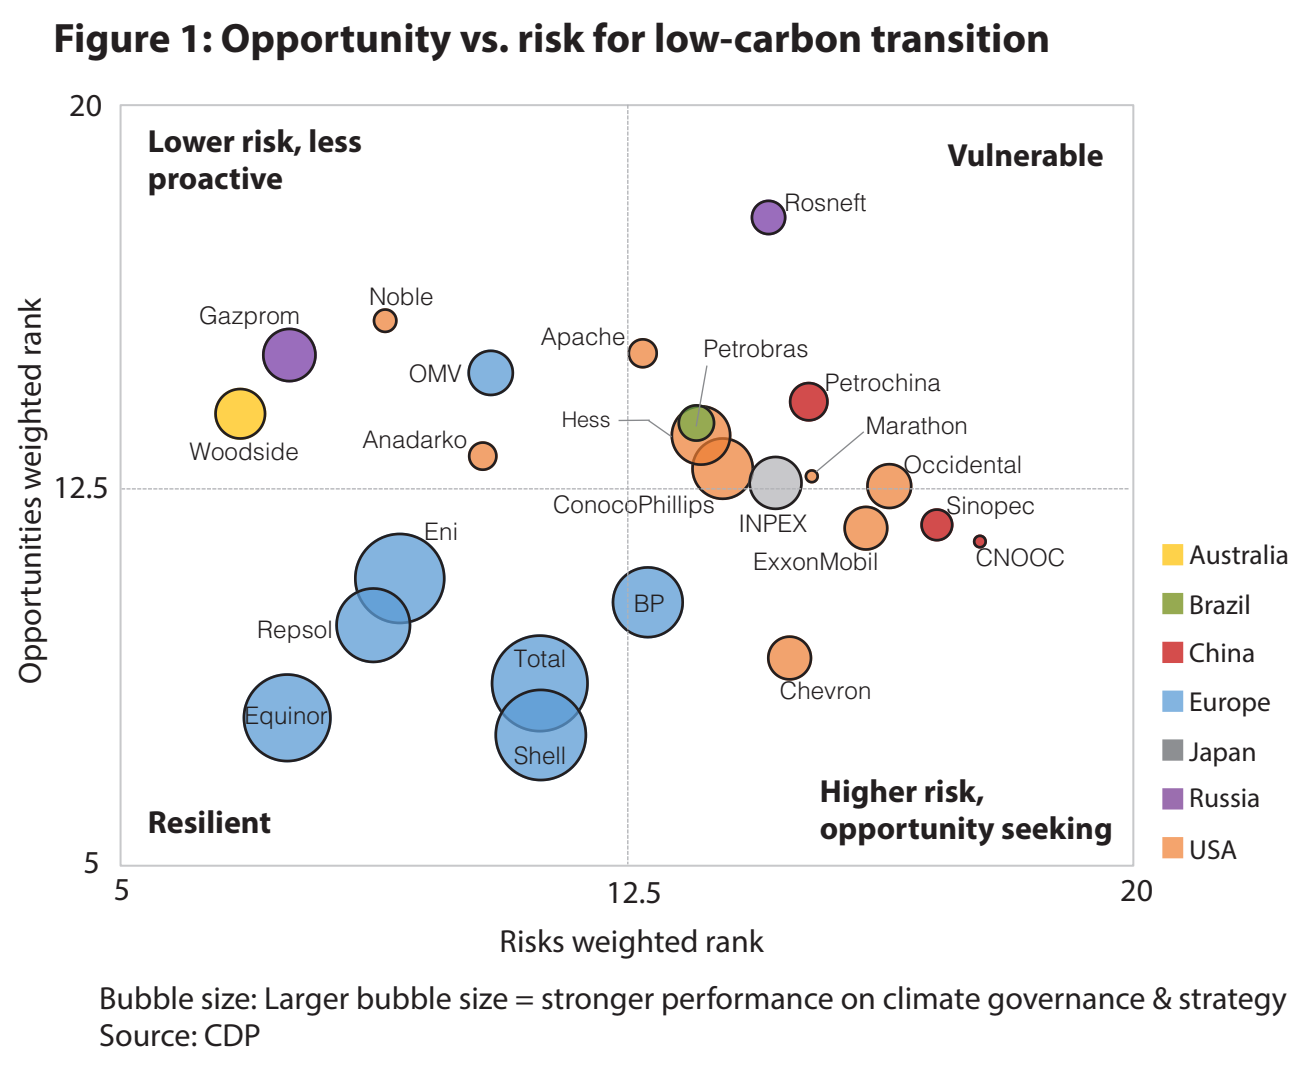 Bubble chart showing opportunity vs. risk for low-carbon transition for international oil companies (IOCs) and national oil companies (NOCs) in 2017. Larger bubble size = stronger performance on climate governance and strategy. Graphic: CDP